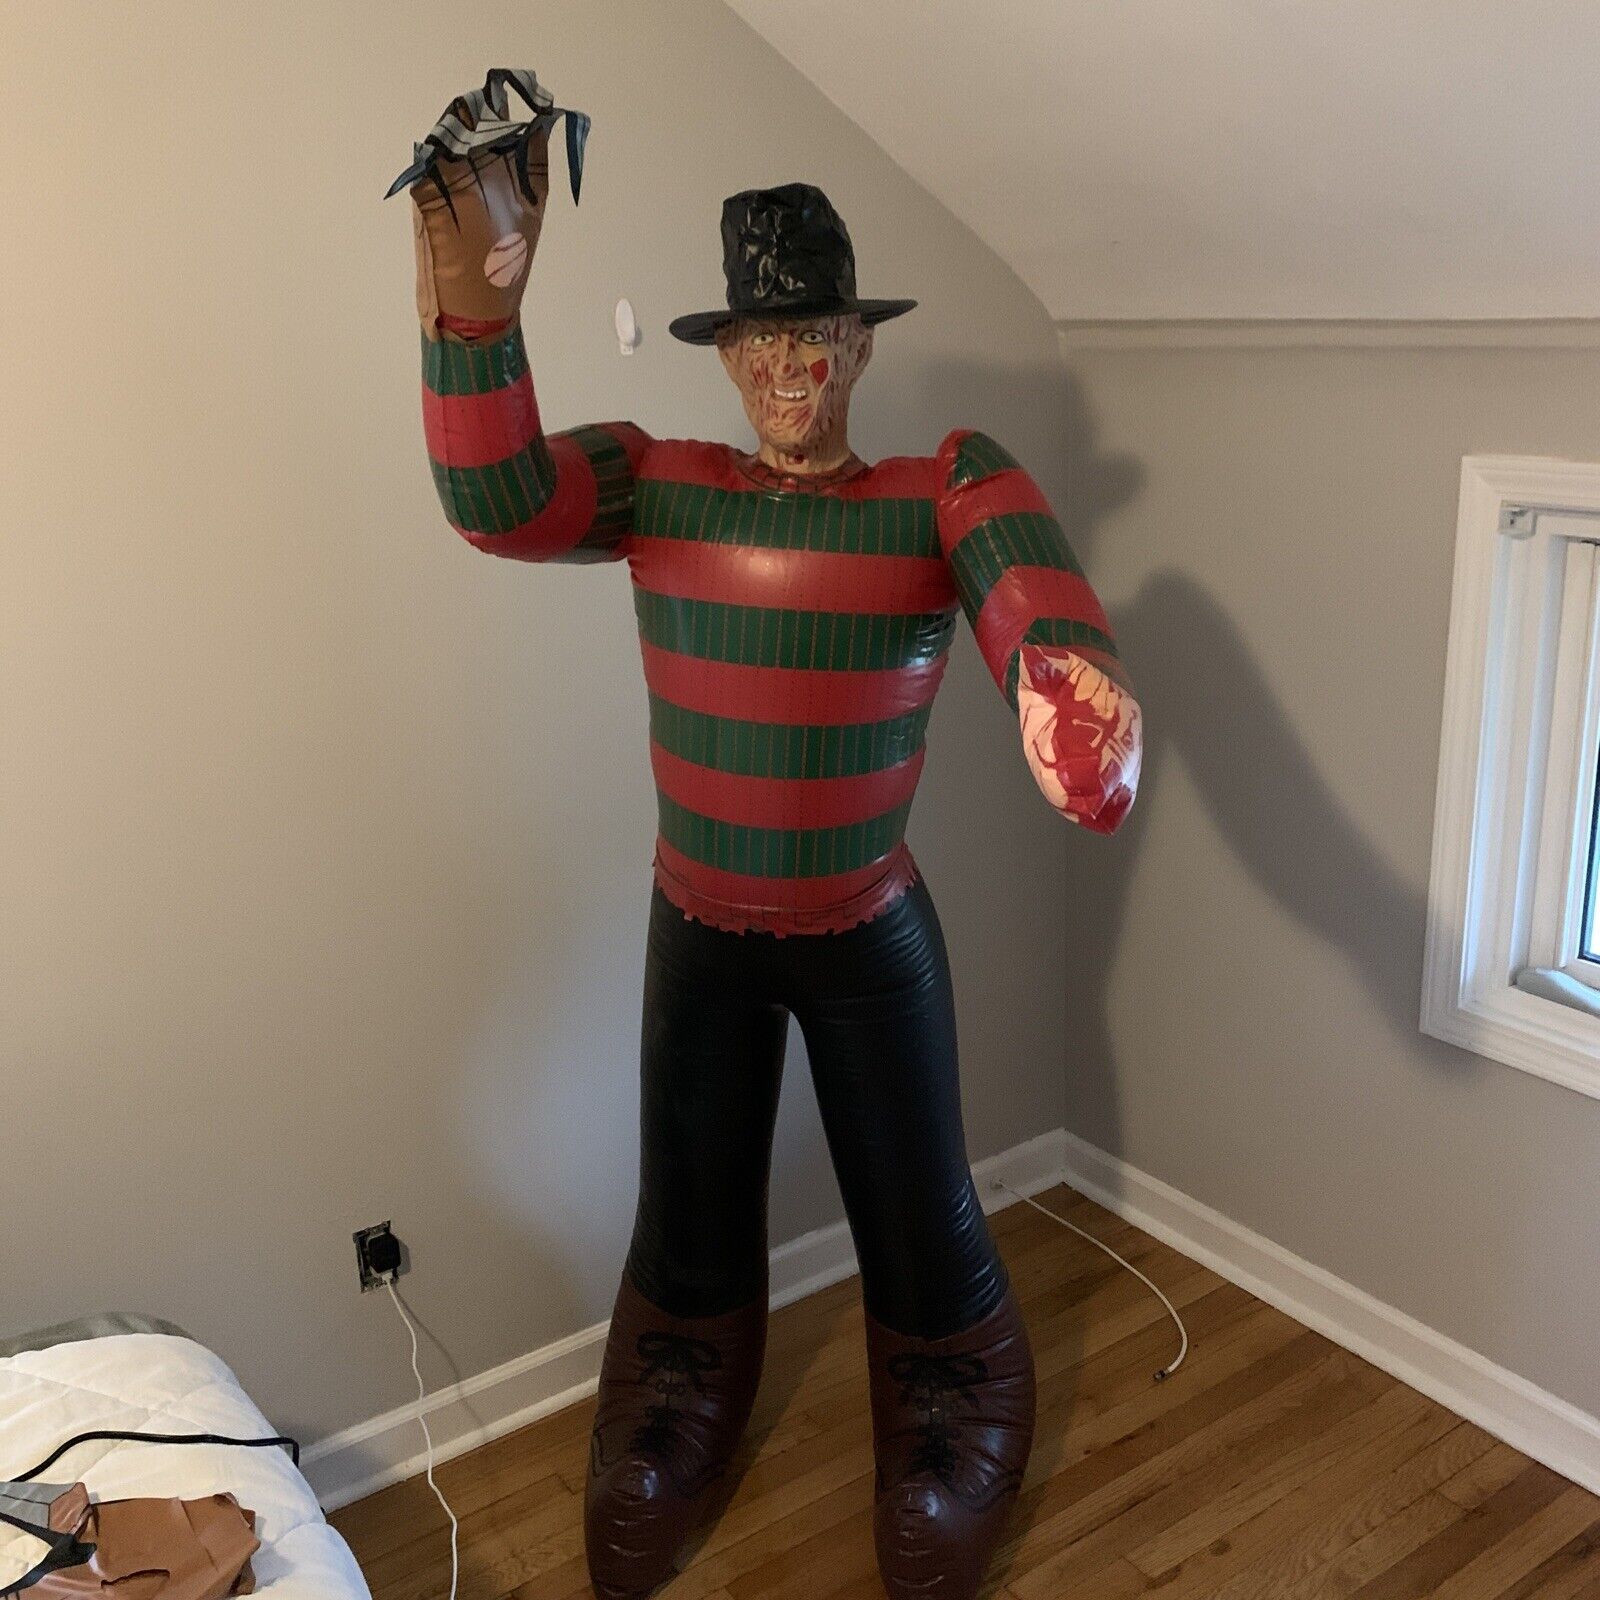 GIANT 6 FT INFLATABLE FREDDY KRUEGER A NIGHTMARE ON ELM ST. IMPERIAL TOYS 1984